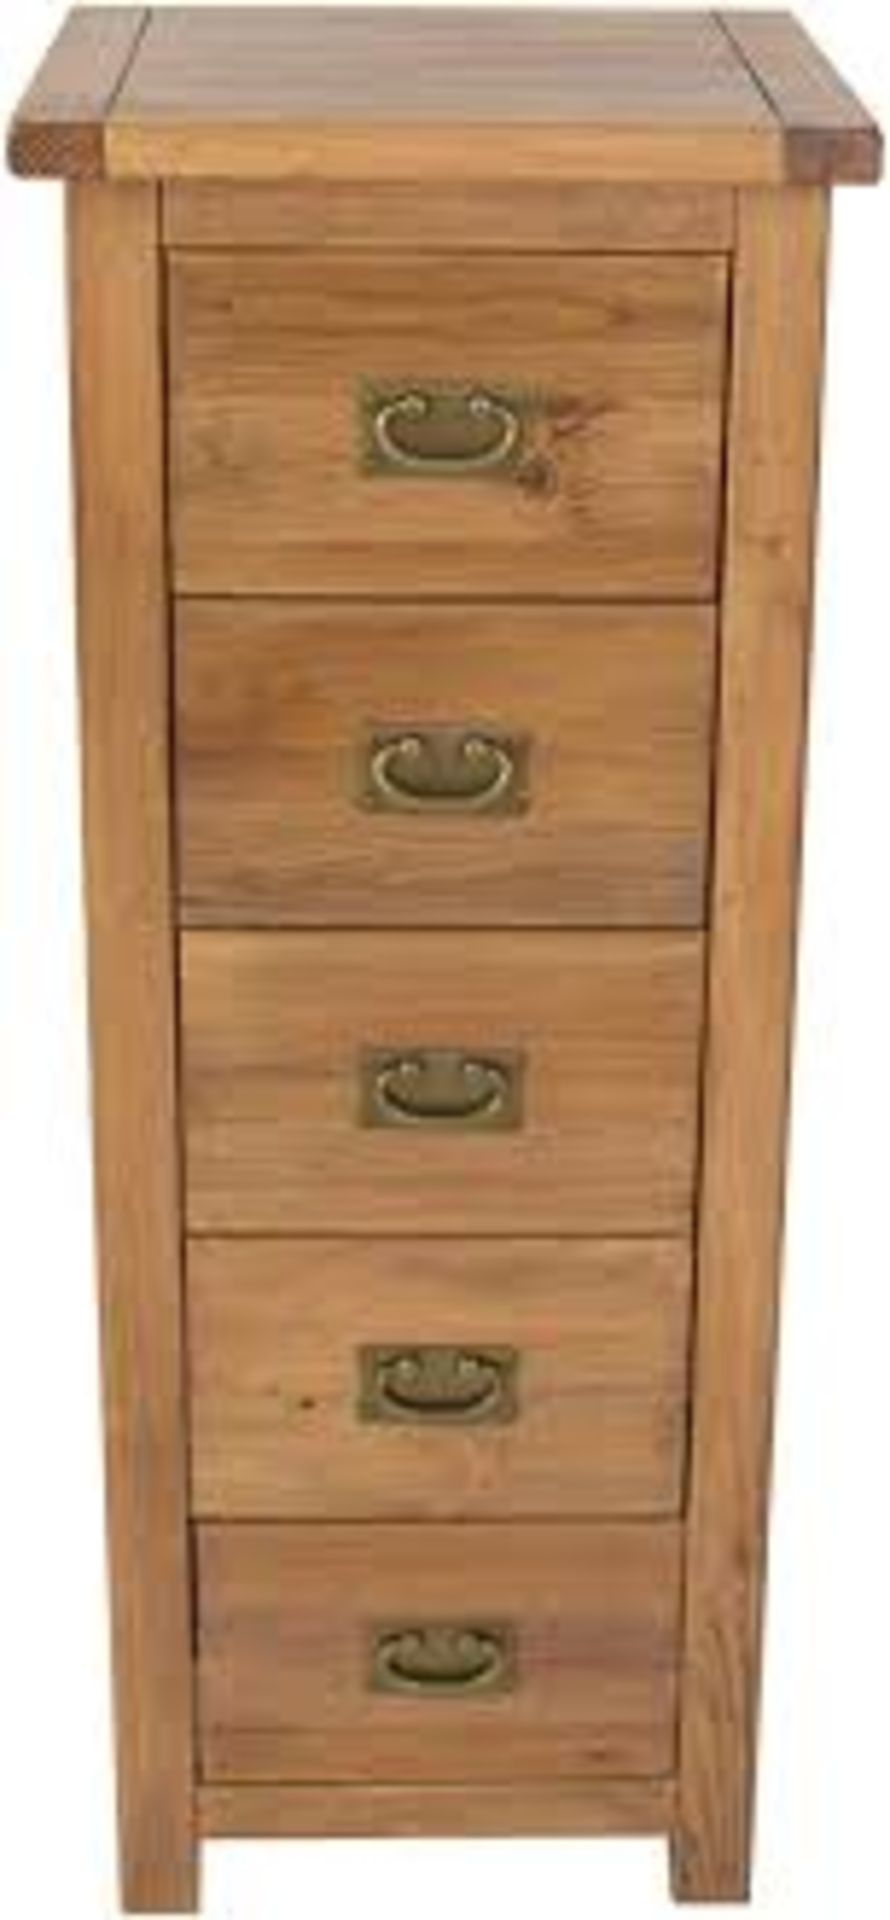 Boxed Antique Lacquer Narrow Chest Of 5 Drawers RRP £150 (16768) (Pictures Are For Illustration